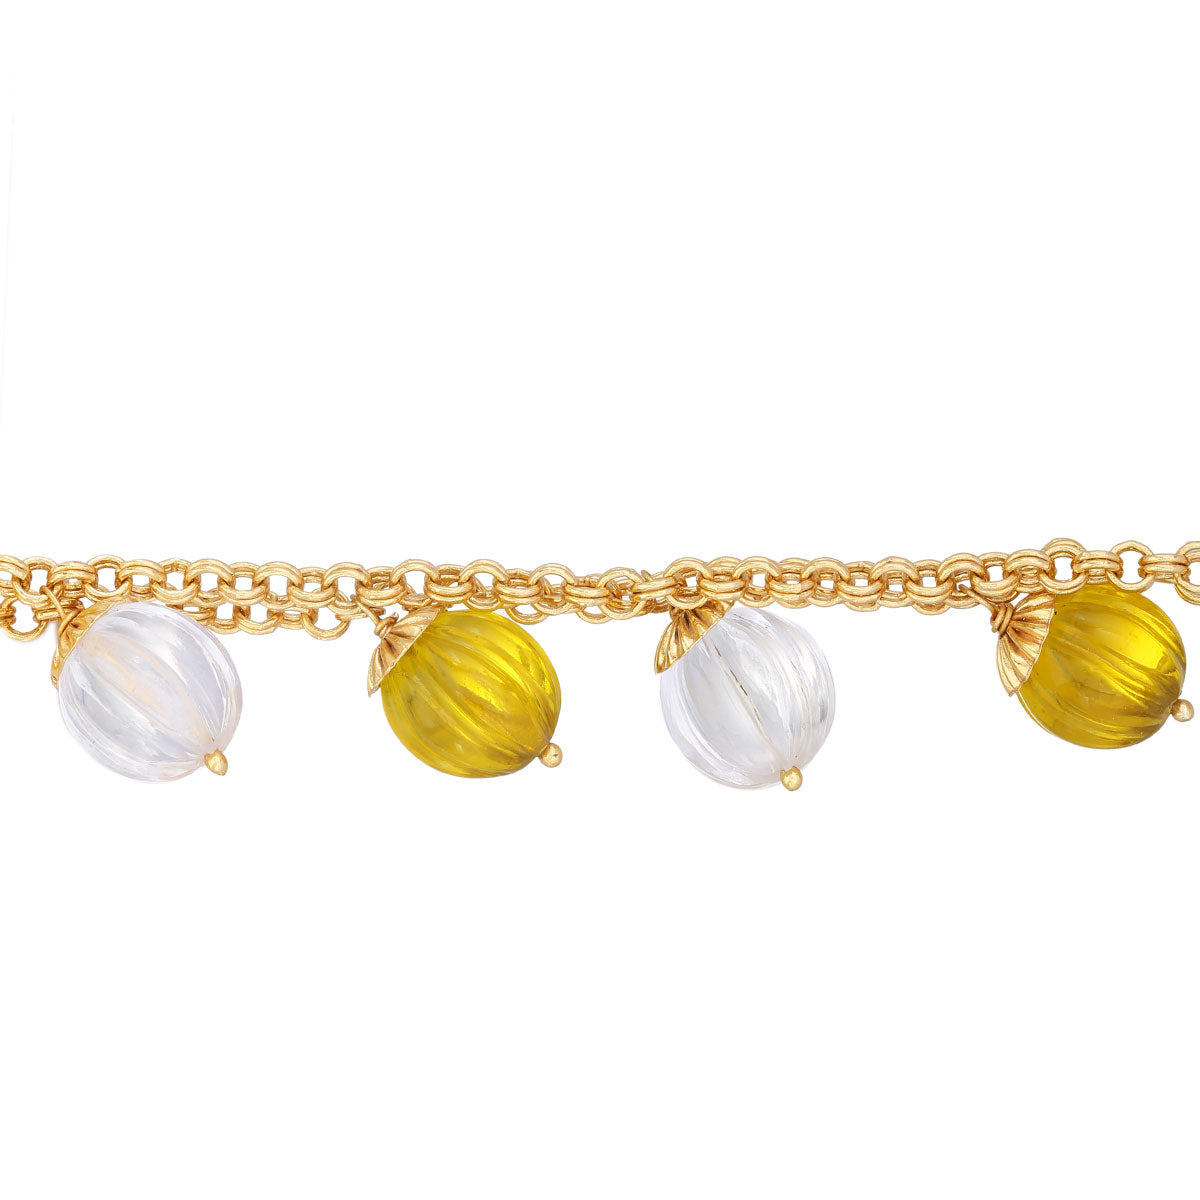 Yellow and clear Melon Bracelet